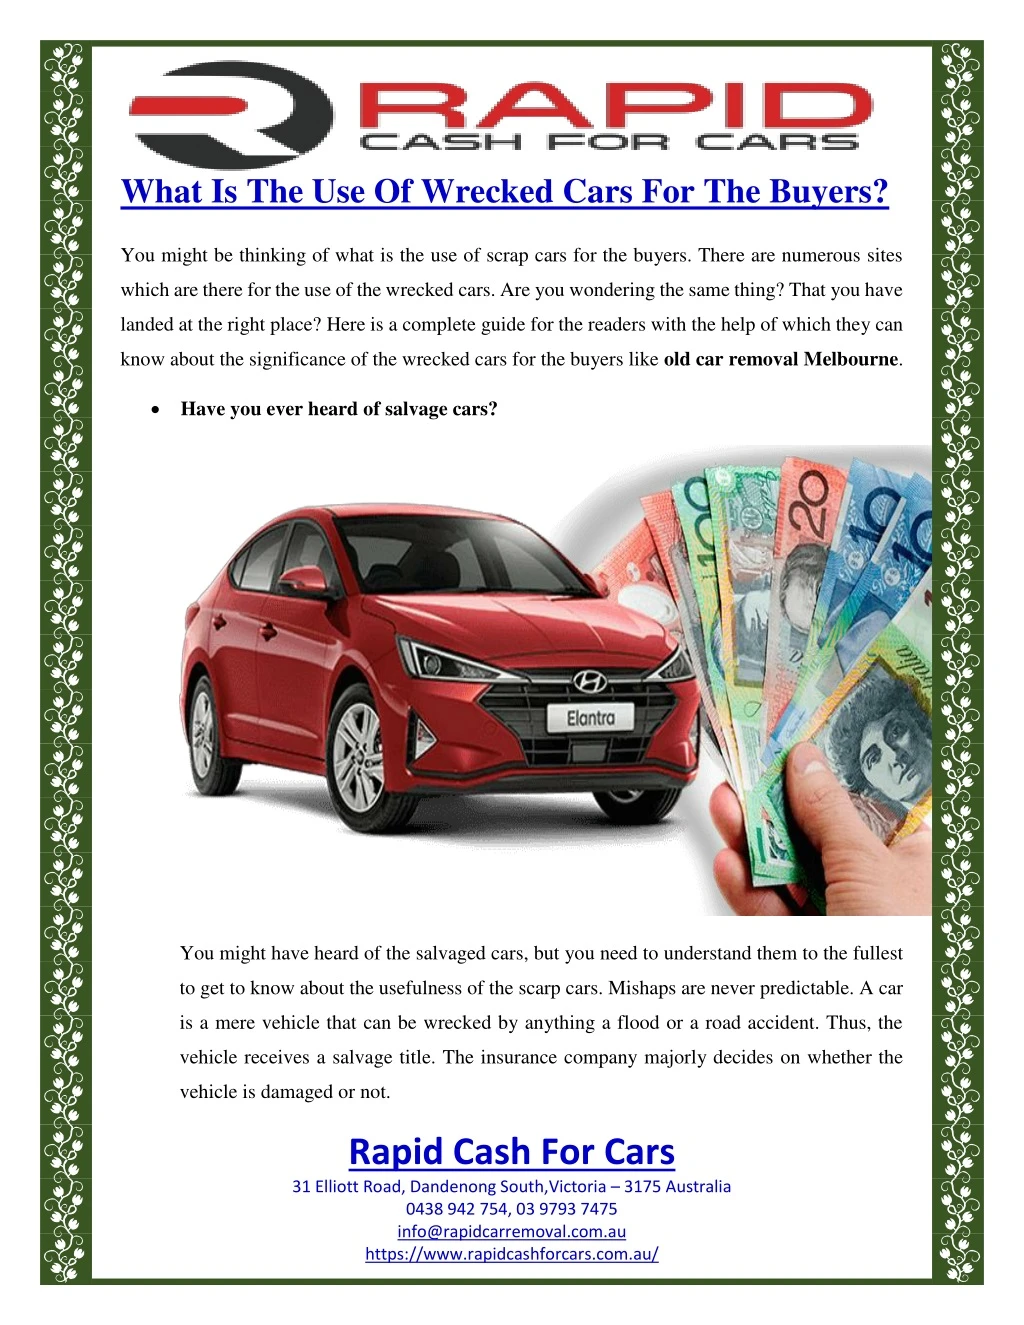 what is the use of wrecked cars for the buyers